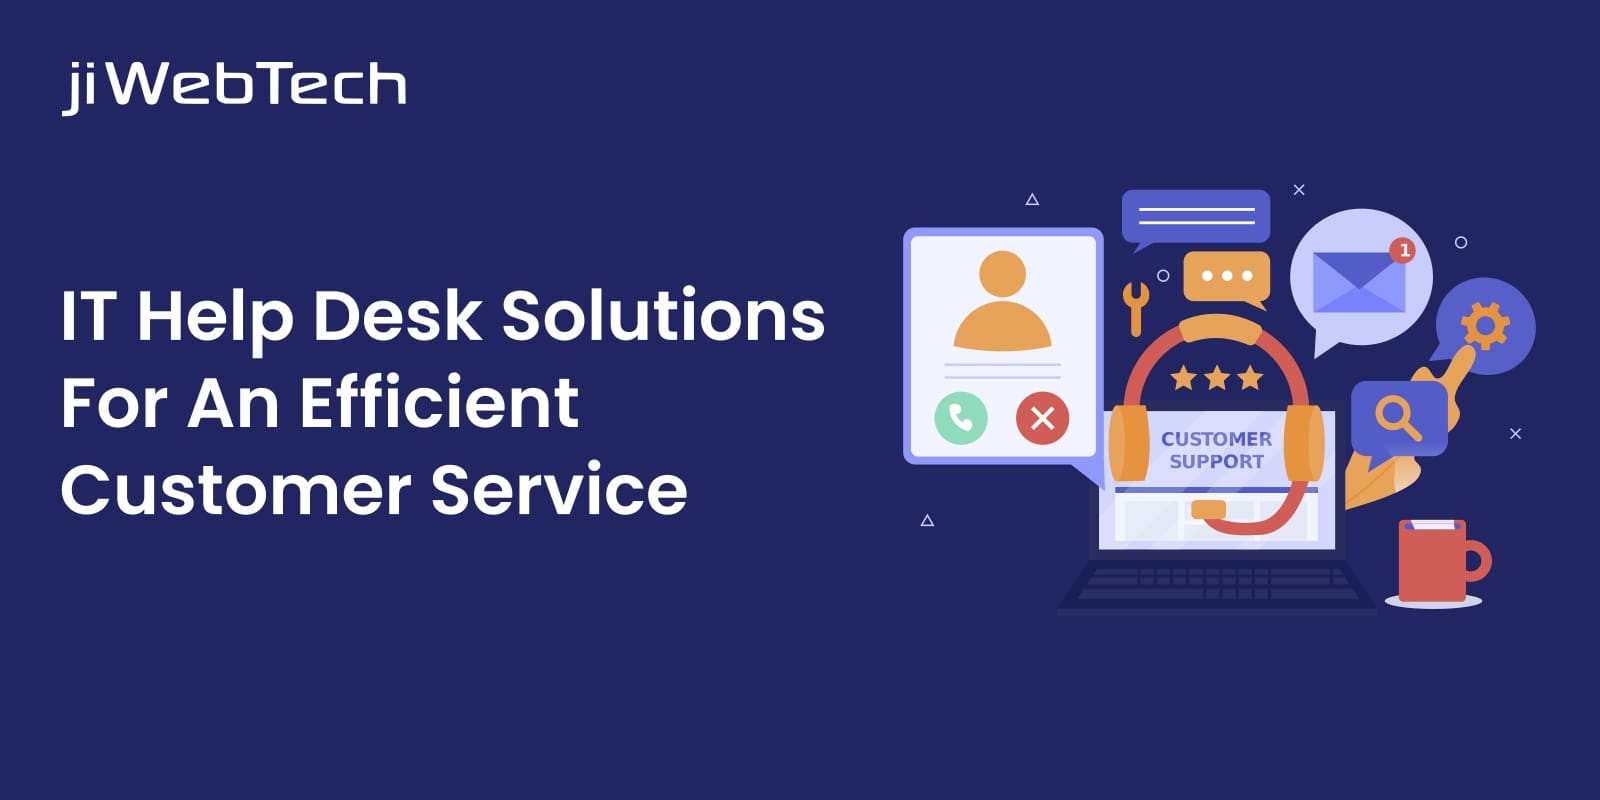 Why Choose IT Help Desk Solutions For An Efficient Customer Service?